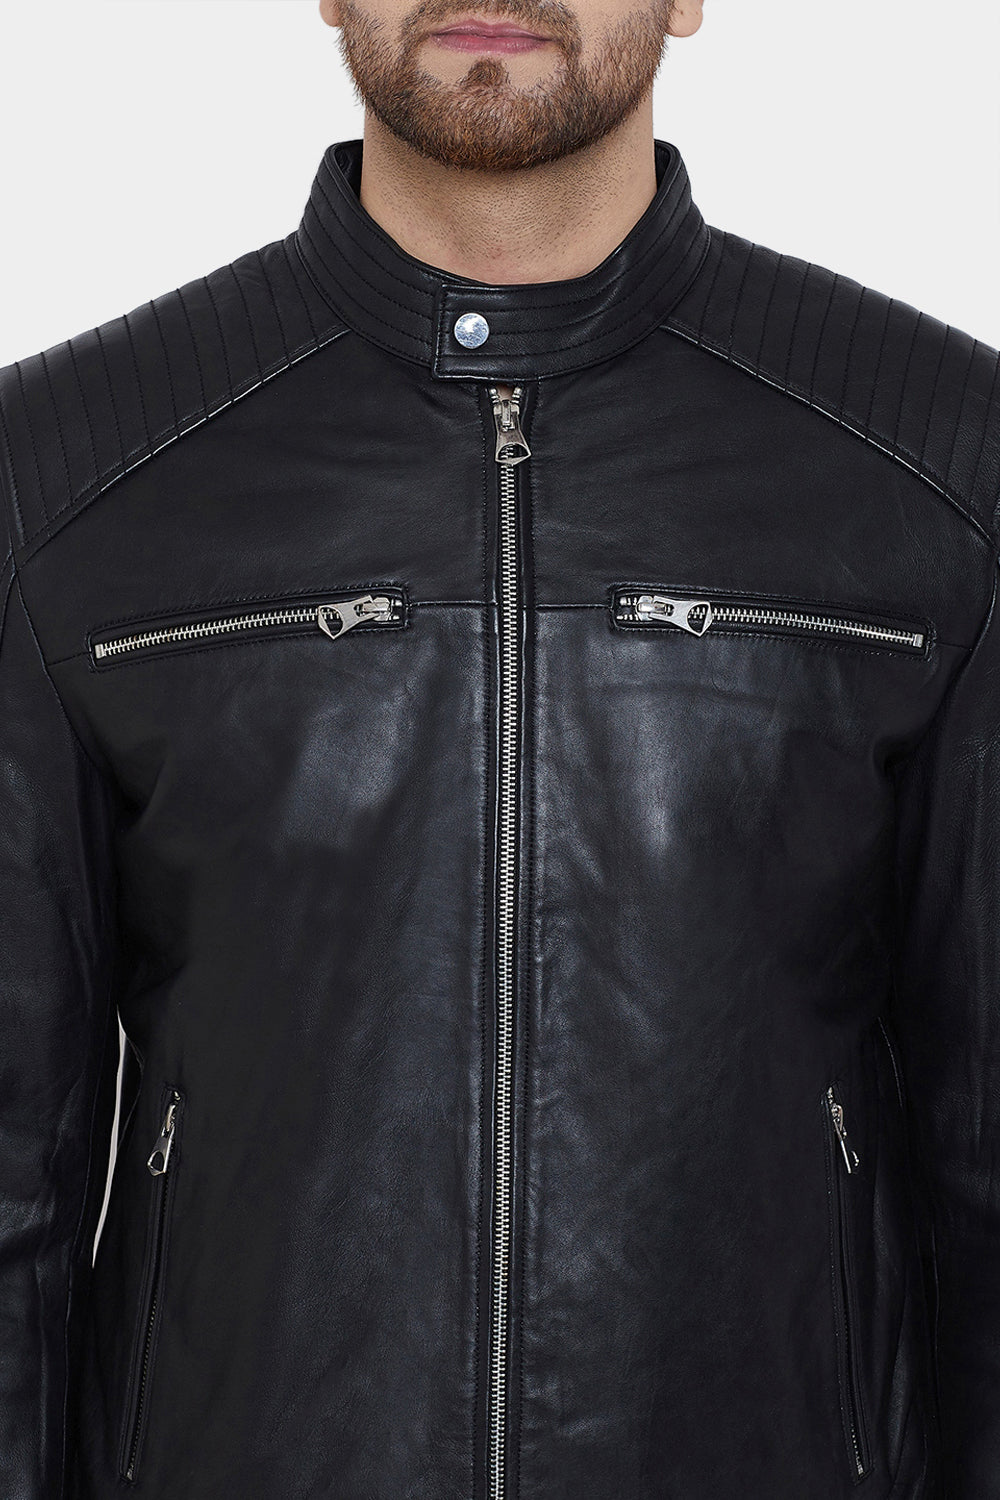 Justanned Real Leather Black Jacket